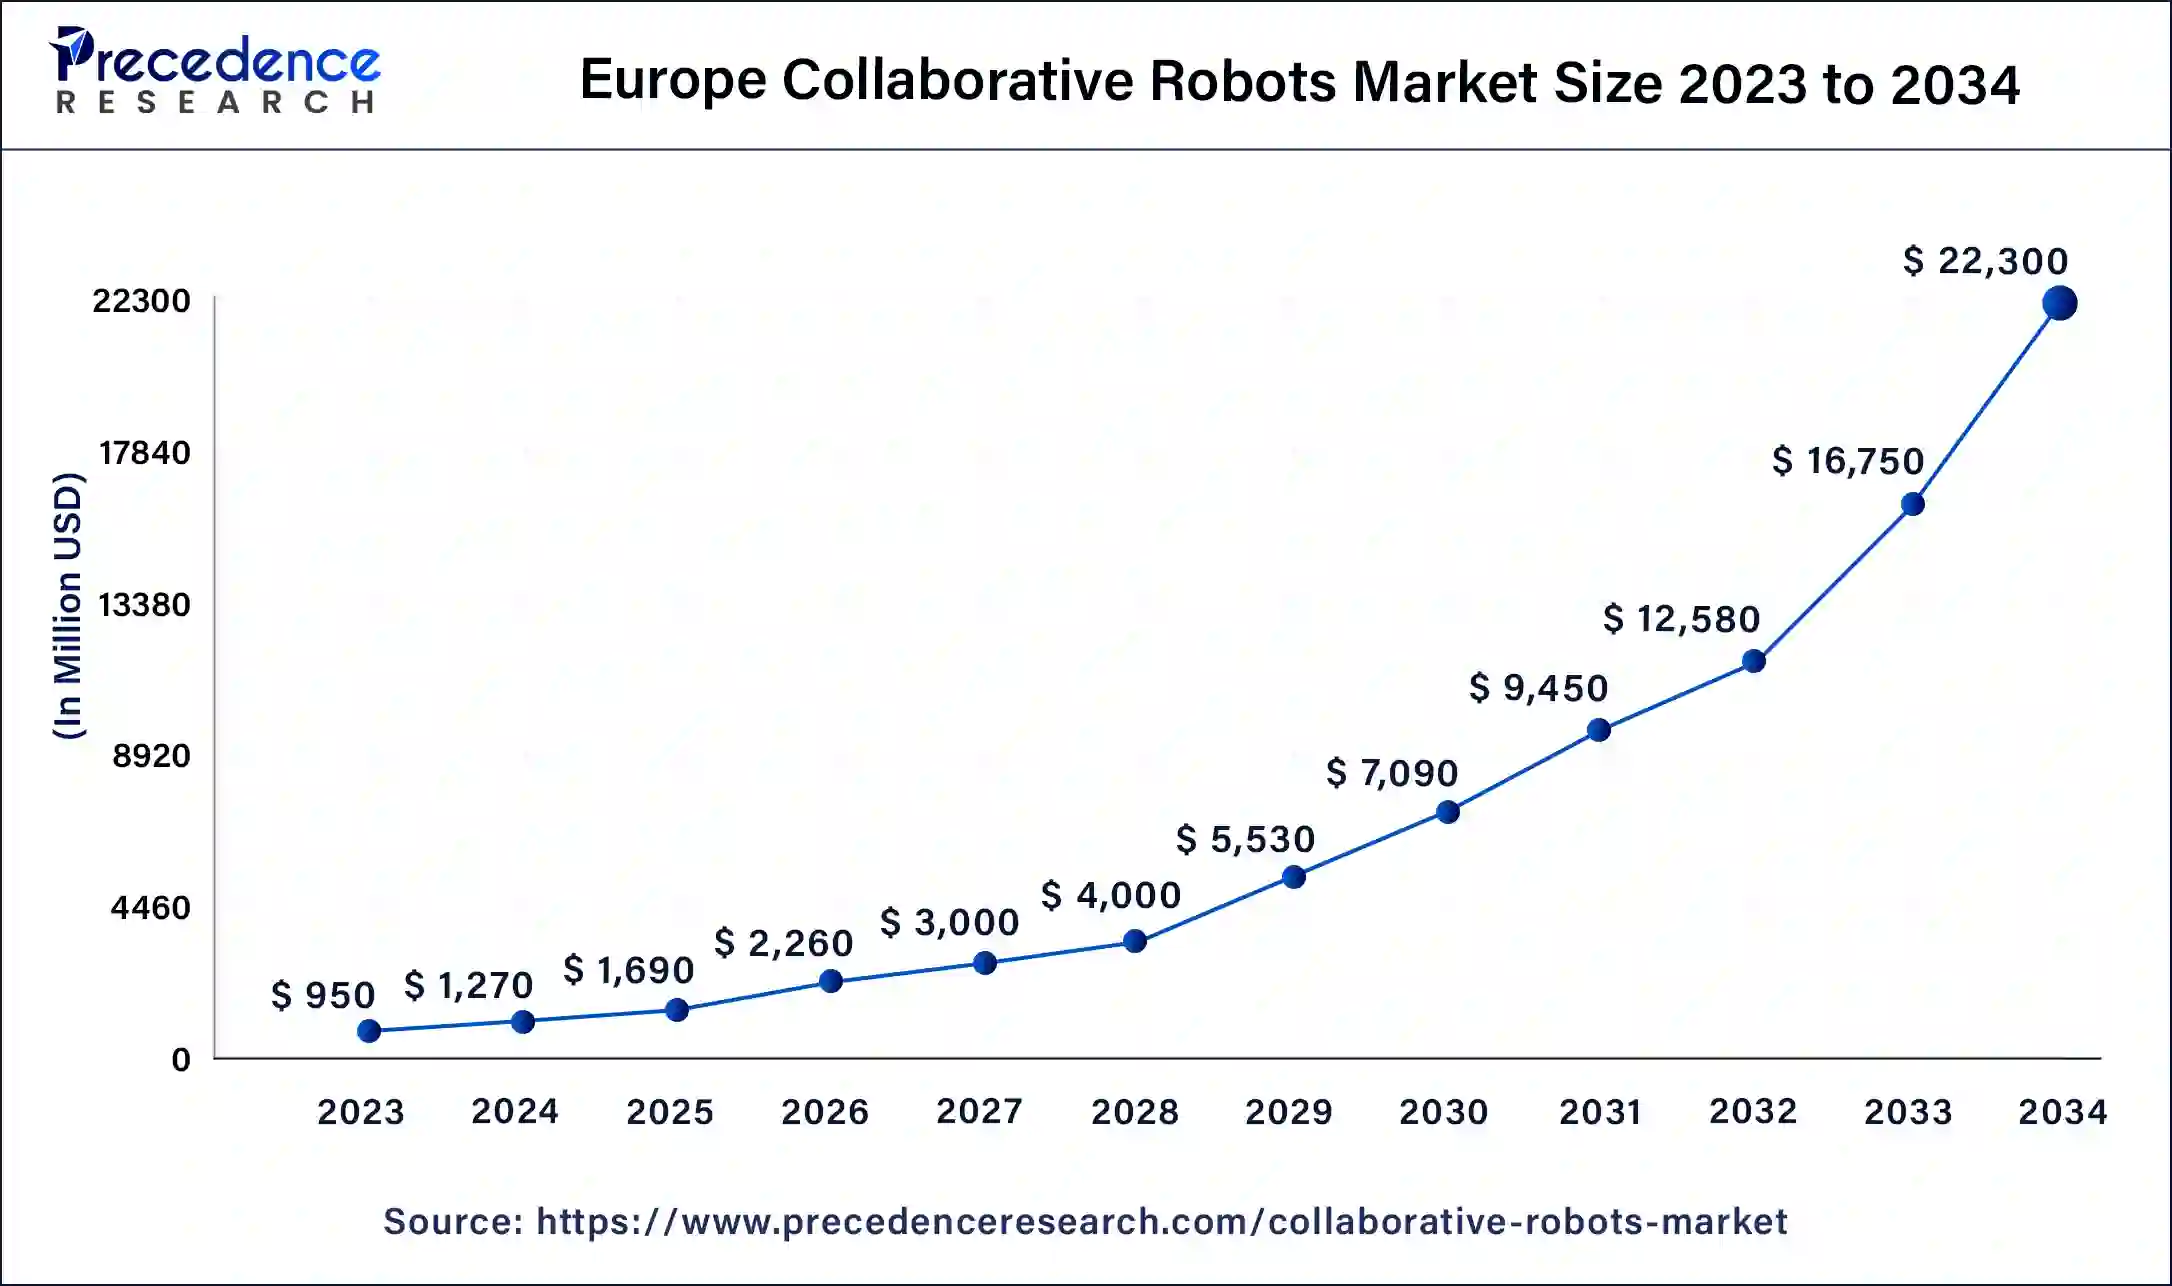 Europe Collaborative Robots Market Size 2024 to 2034